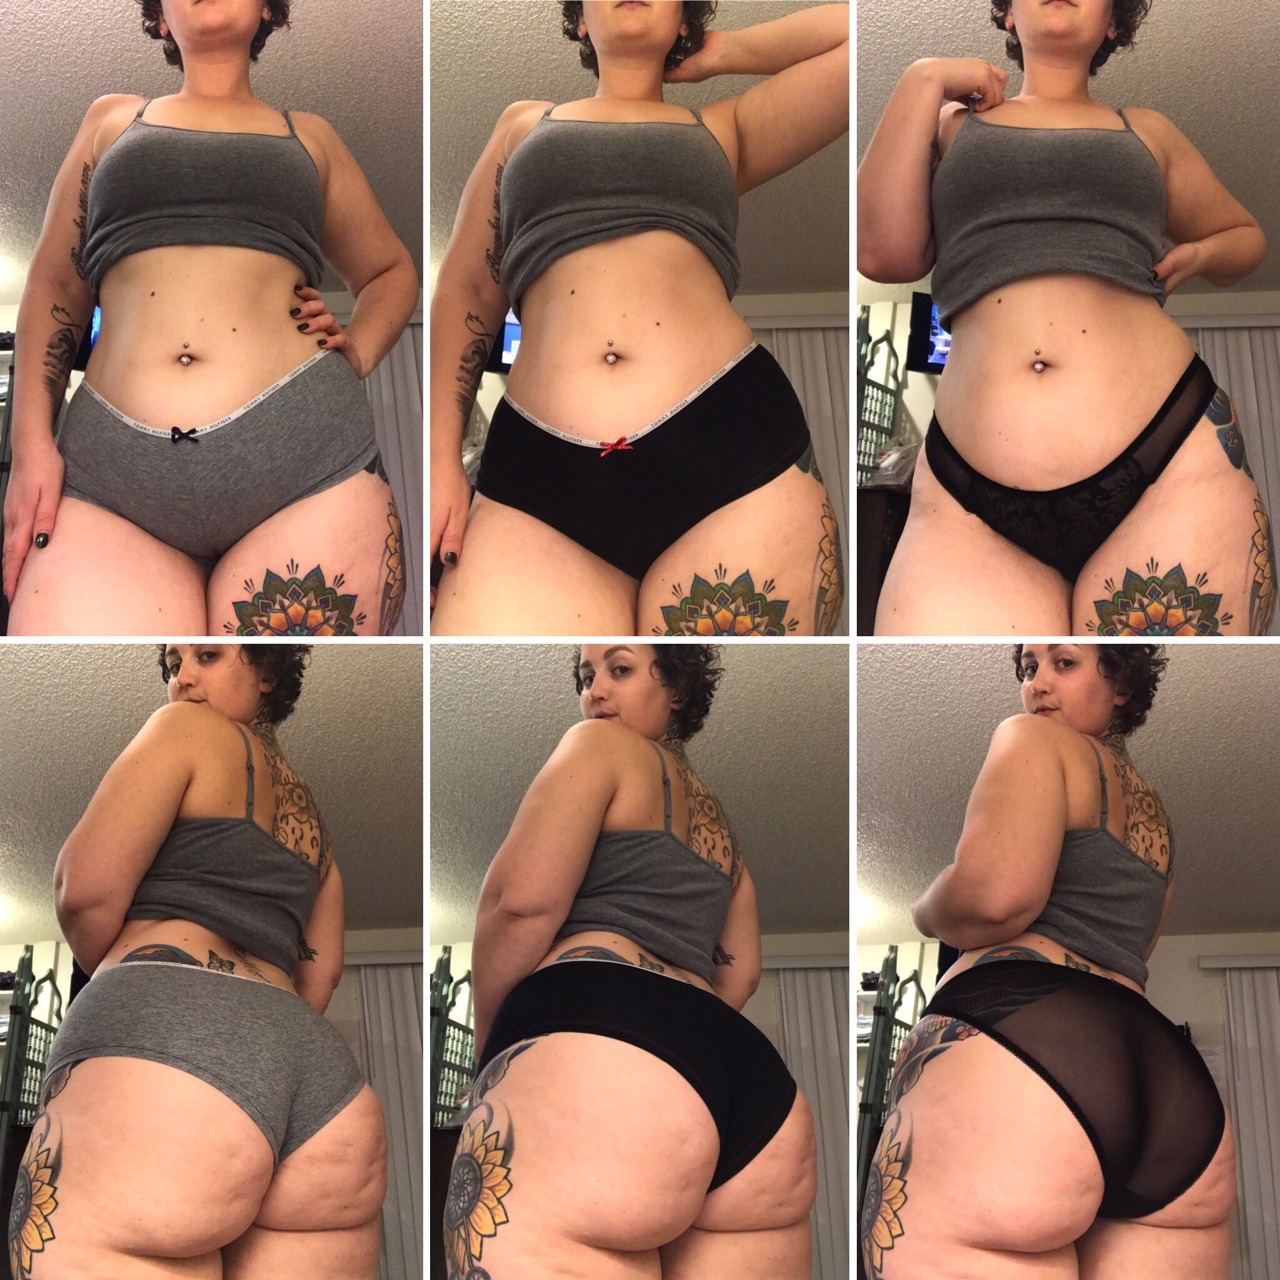 thickiinickii:  9 pairs of panties left!! Once these are gone I will be done selling